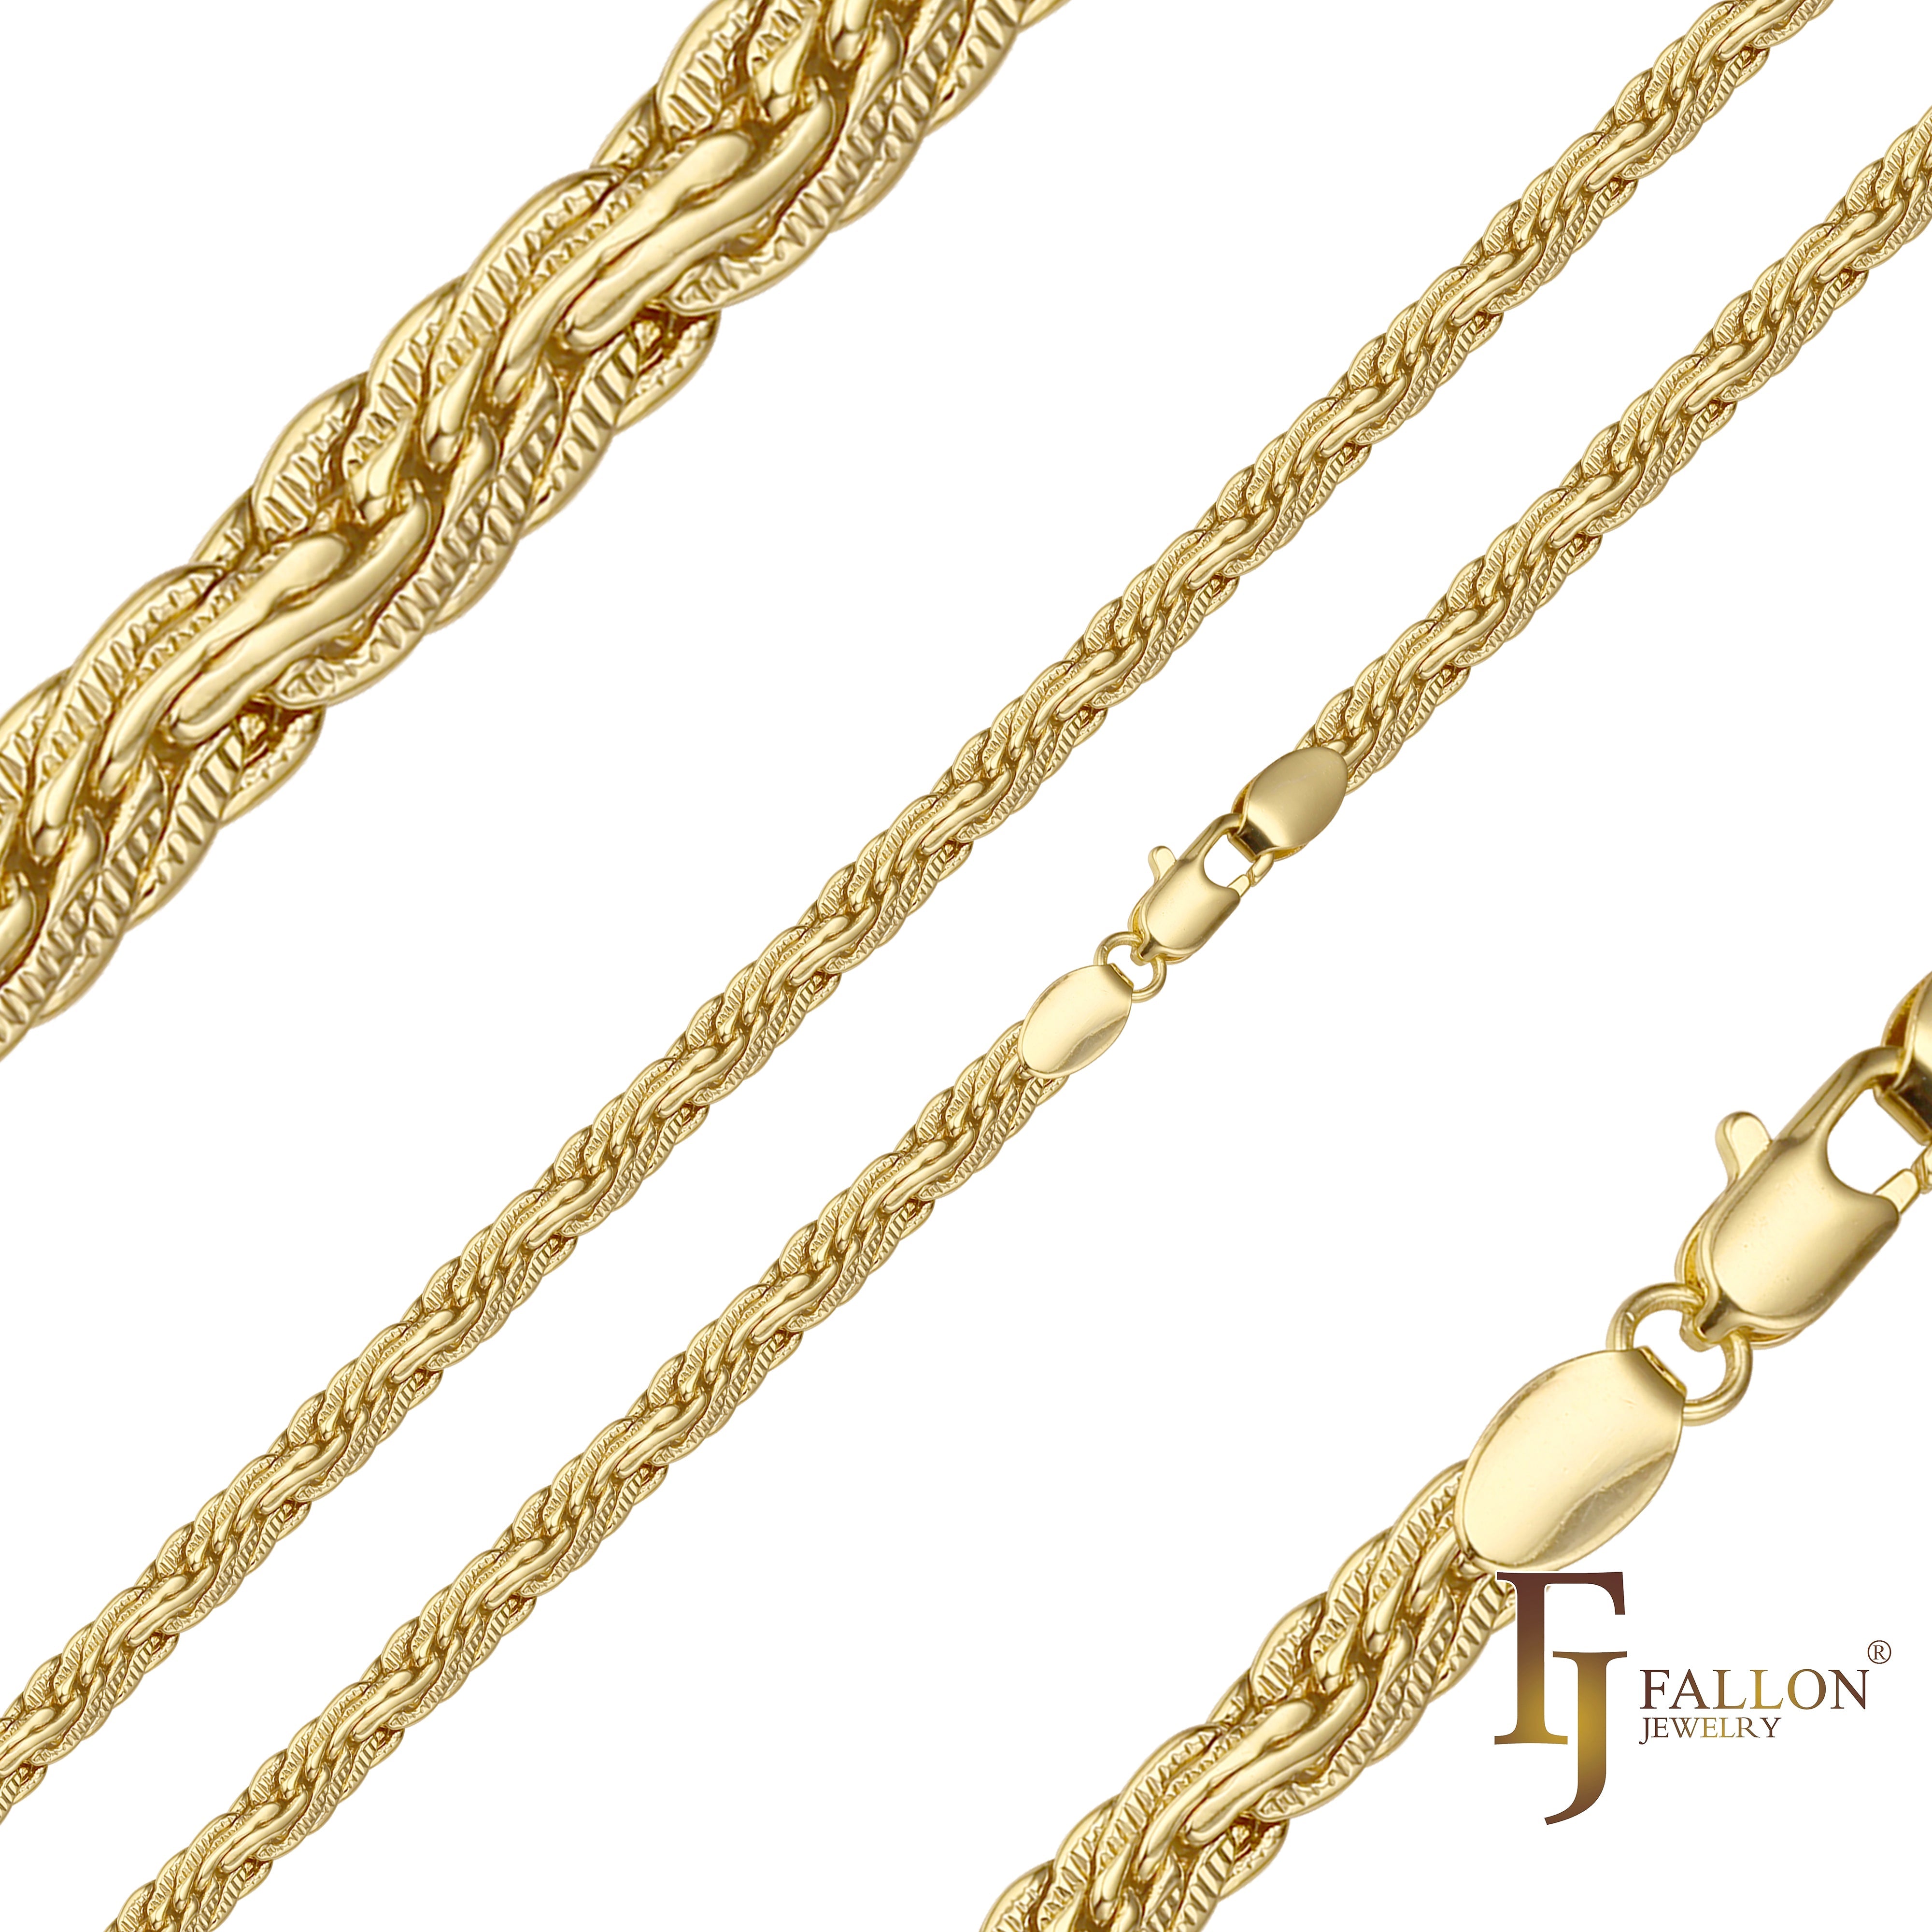 Multi Fancy Spiga C link tire hammered chains plated in 14K Gold, Rose Gold, 18K Gold